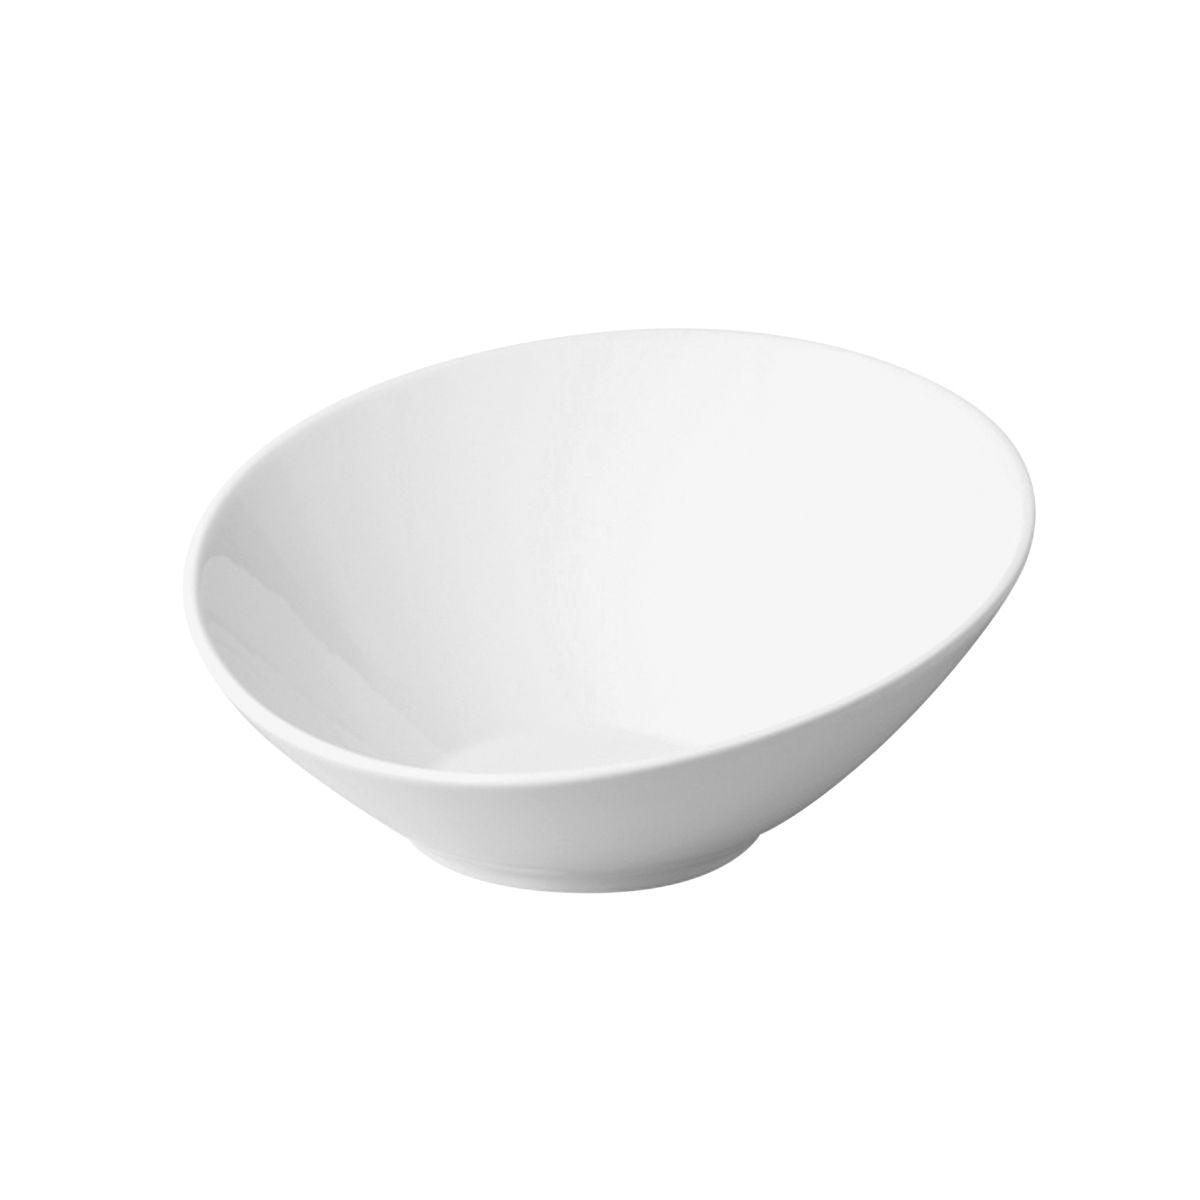 Slant Bowl- 290Mm, Buffet from Australia Fine China. Slanted, made out of Porcelain and sold in boxes of 1. Hospitality quality at wholesale price with The Flying Fork! 